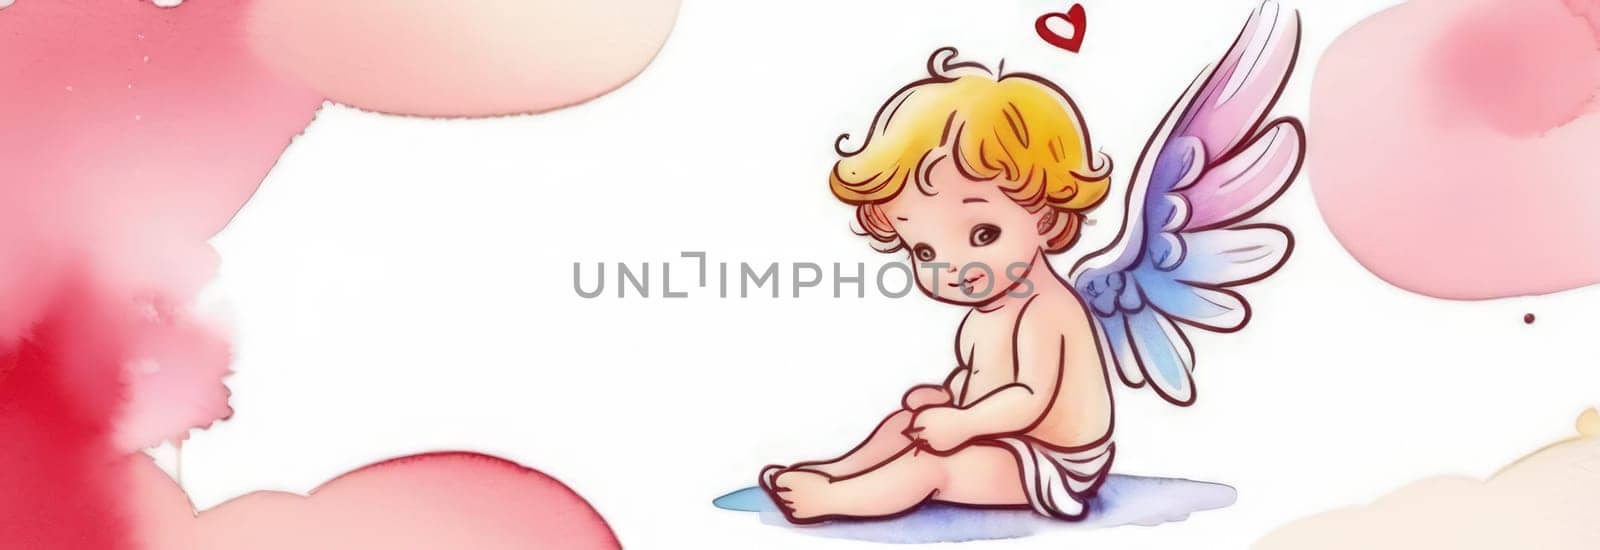 Illustration watercolour of greeting card white, cute, funny baby cupid angel with gold curly hair on pastels background. Promotion, shopping template for love and valentines, mothers day concept